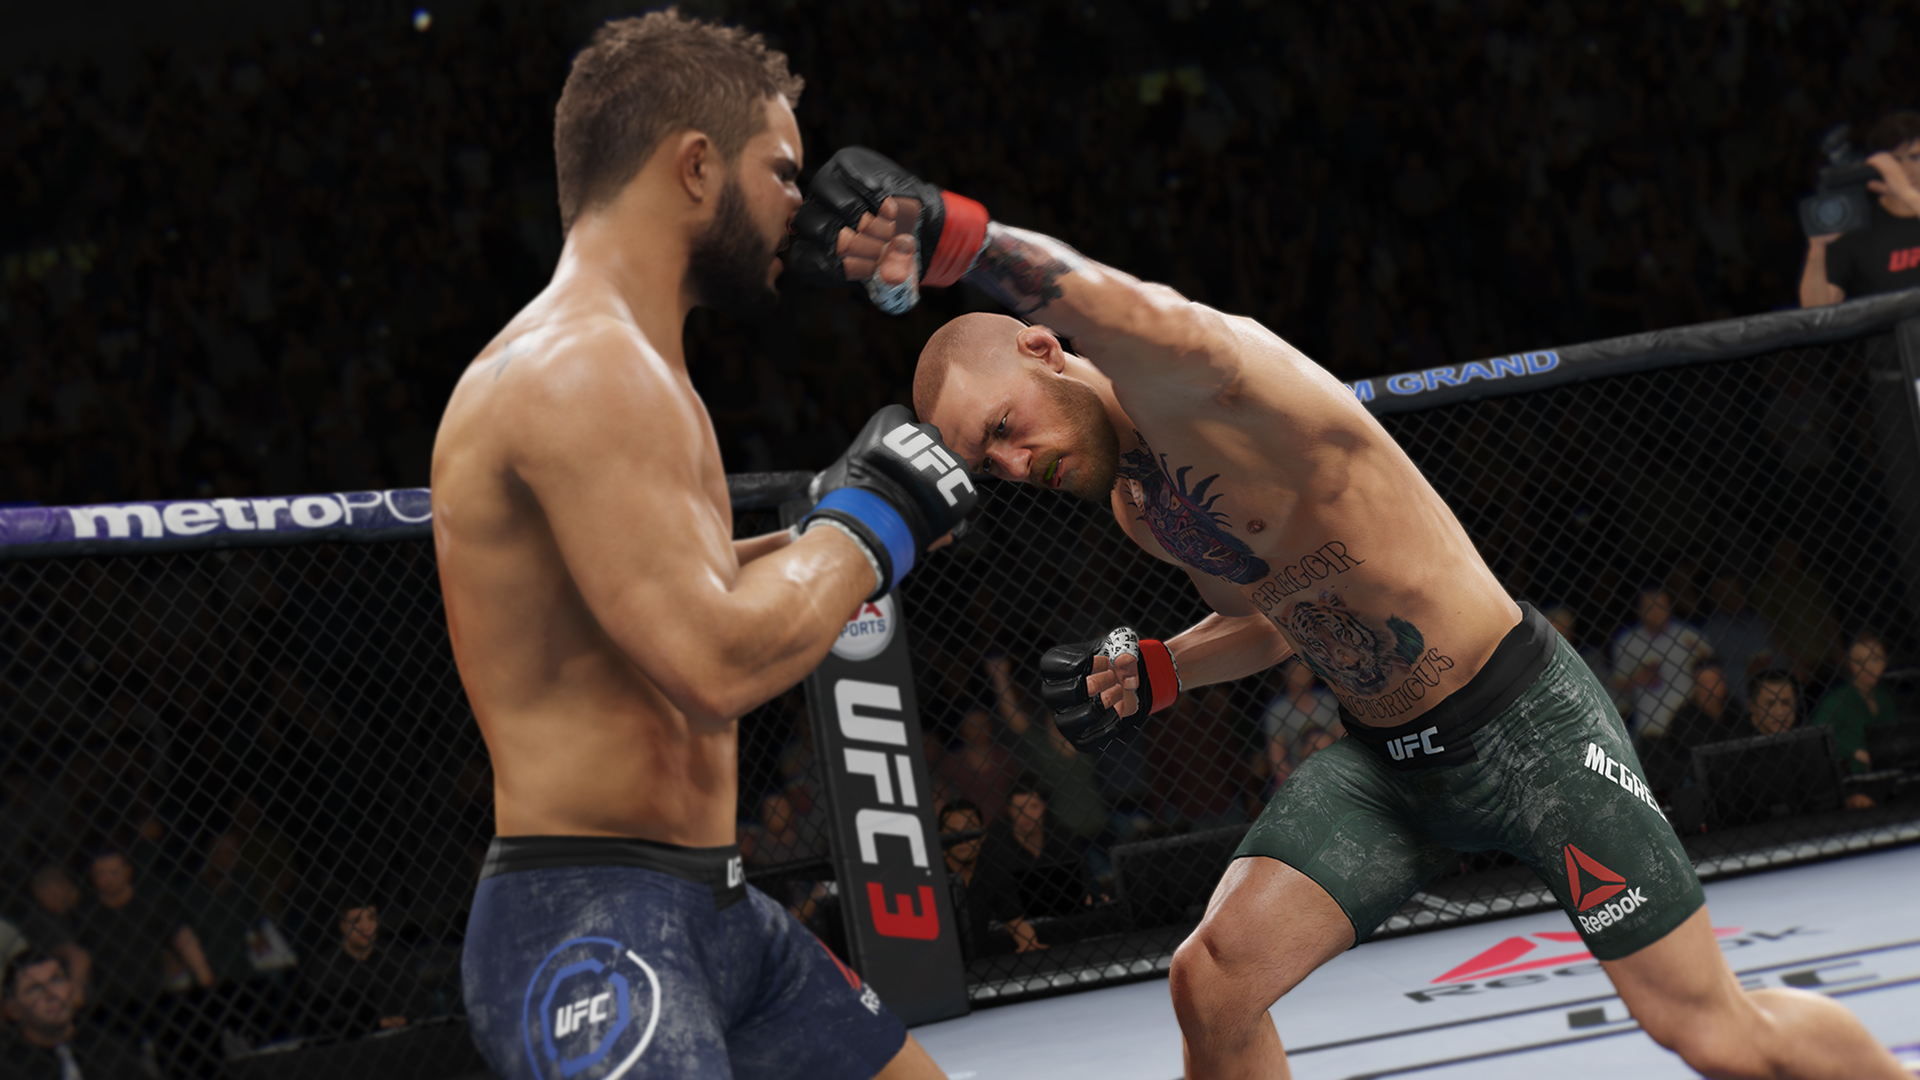 is ufc 3 on pc